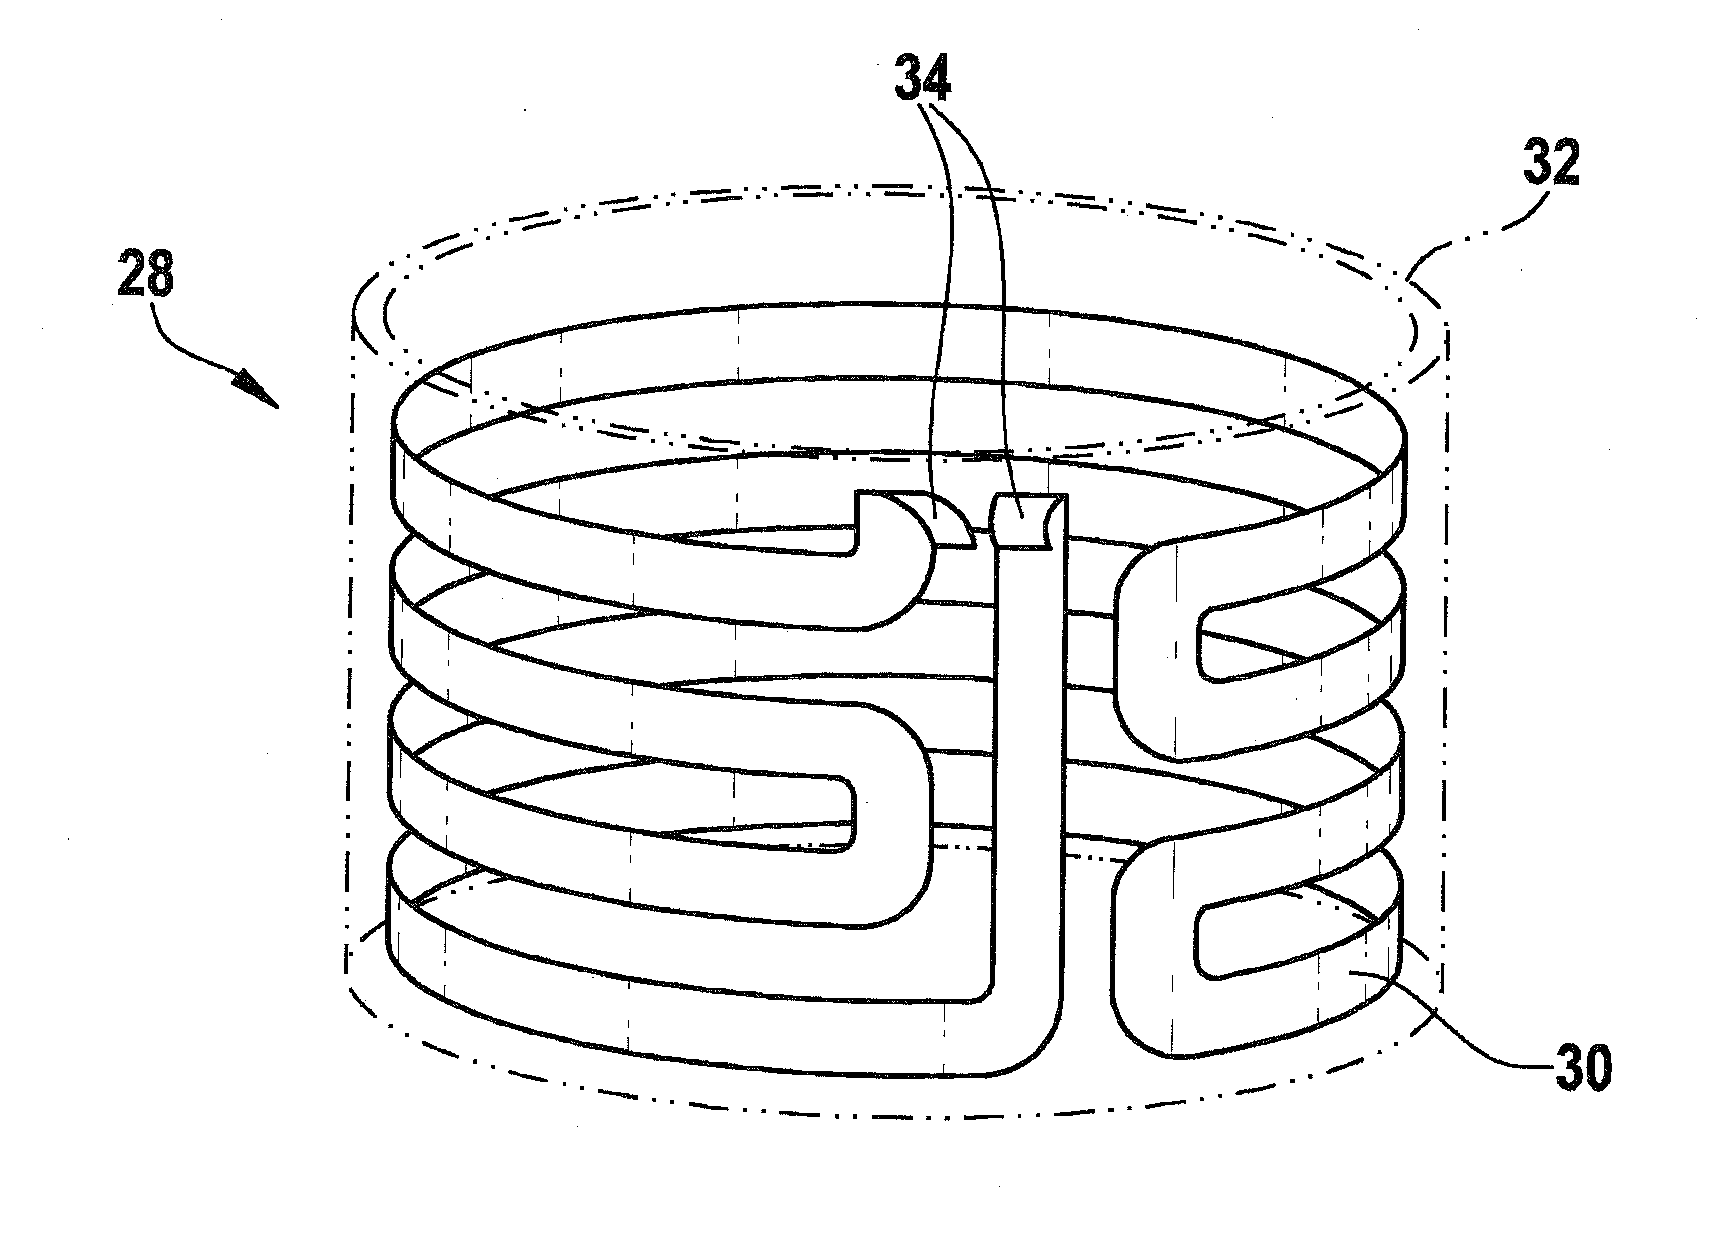 Filter device with a heater